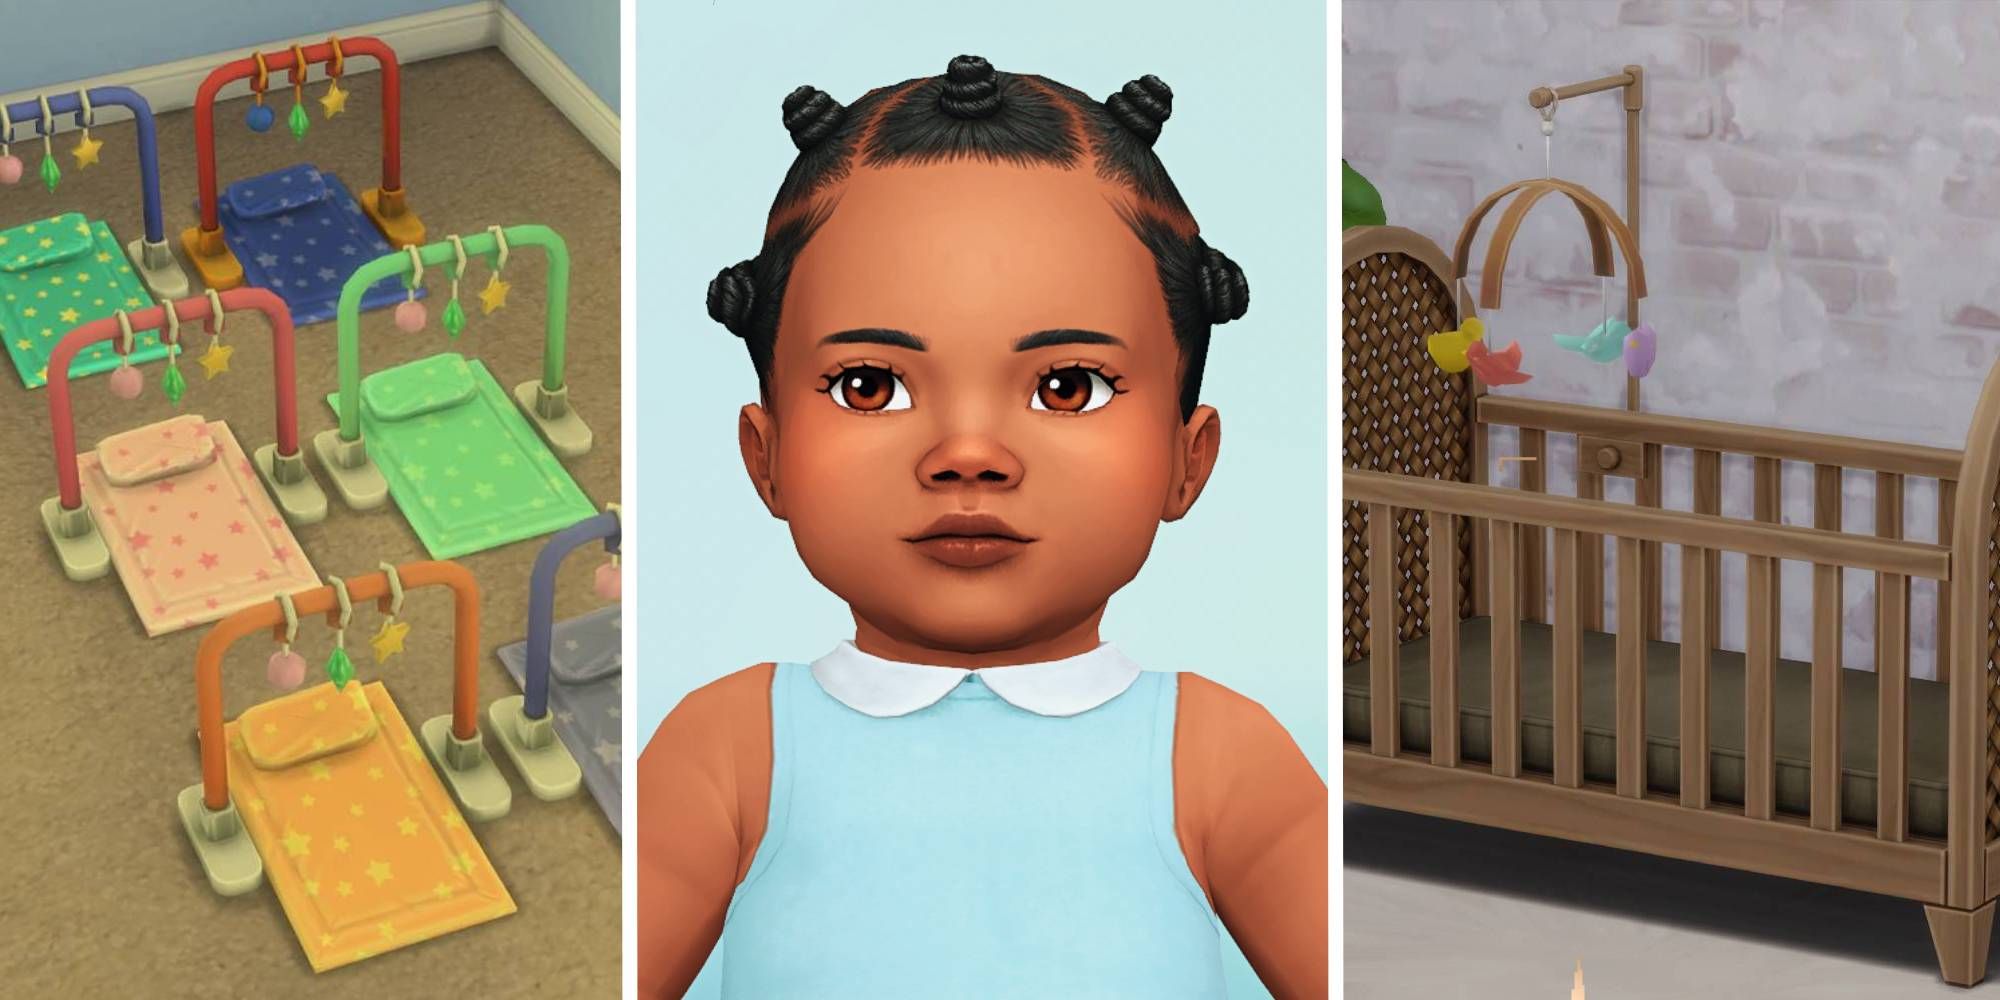 The Sims 4 Infant Mods And CC